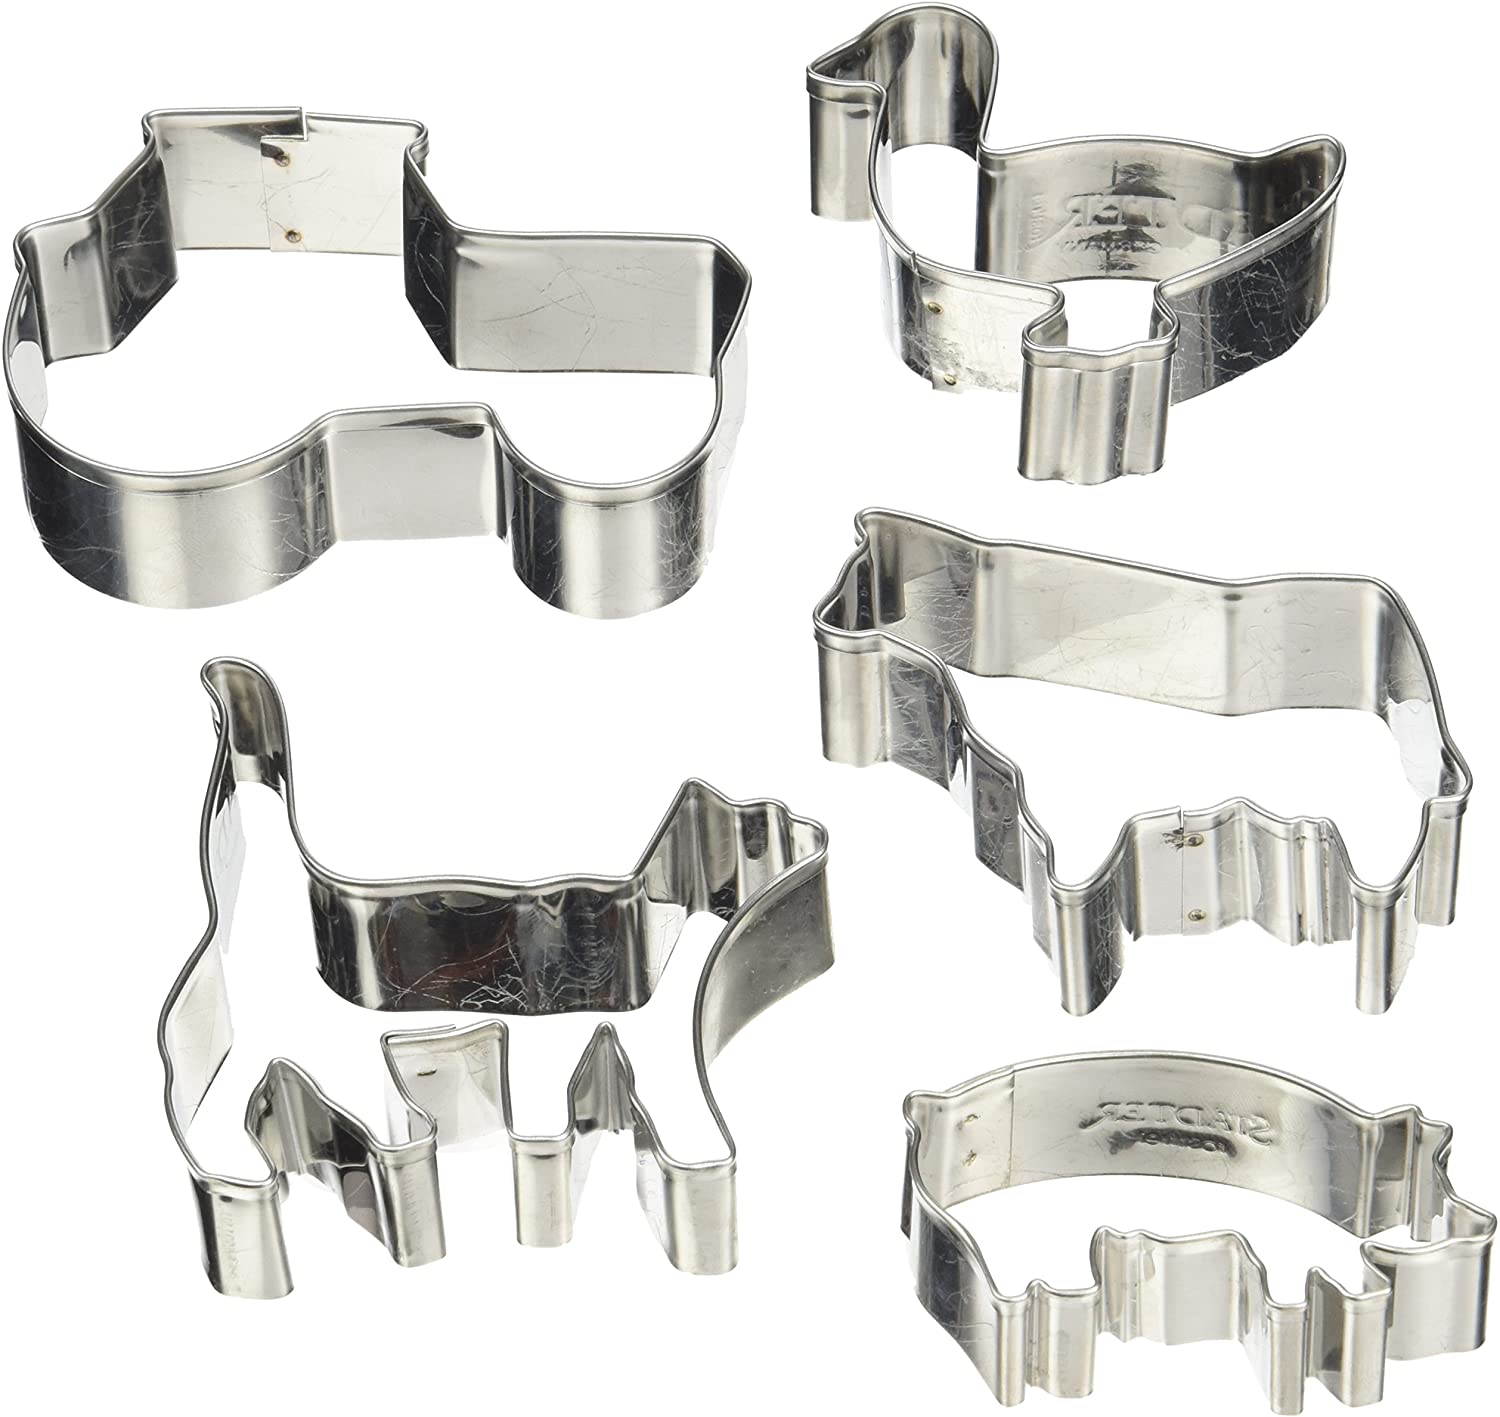 Städter 023864 Cookie Cutter Set 5 Pieces Farm Theme Stainless Steel